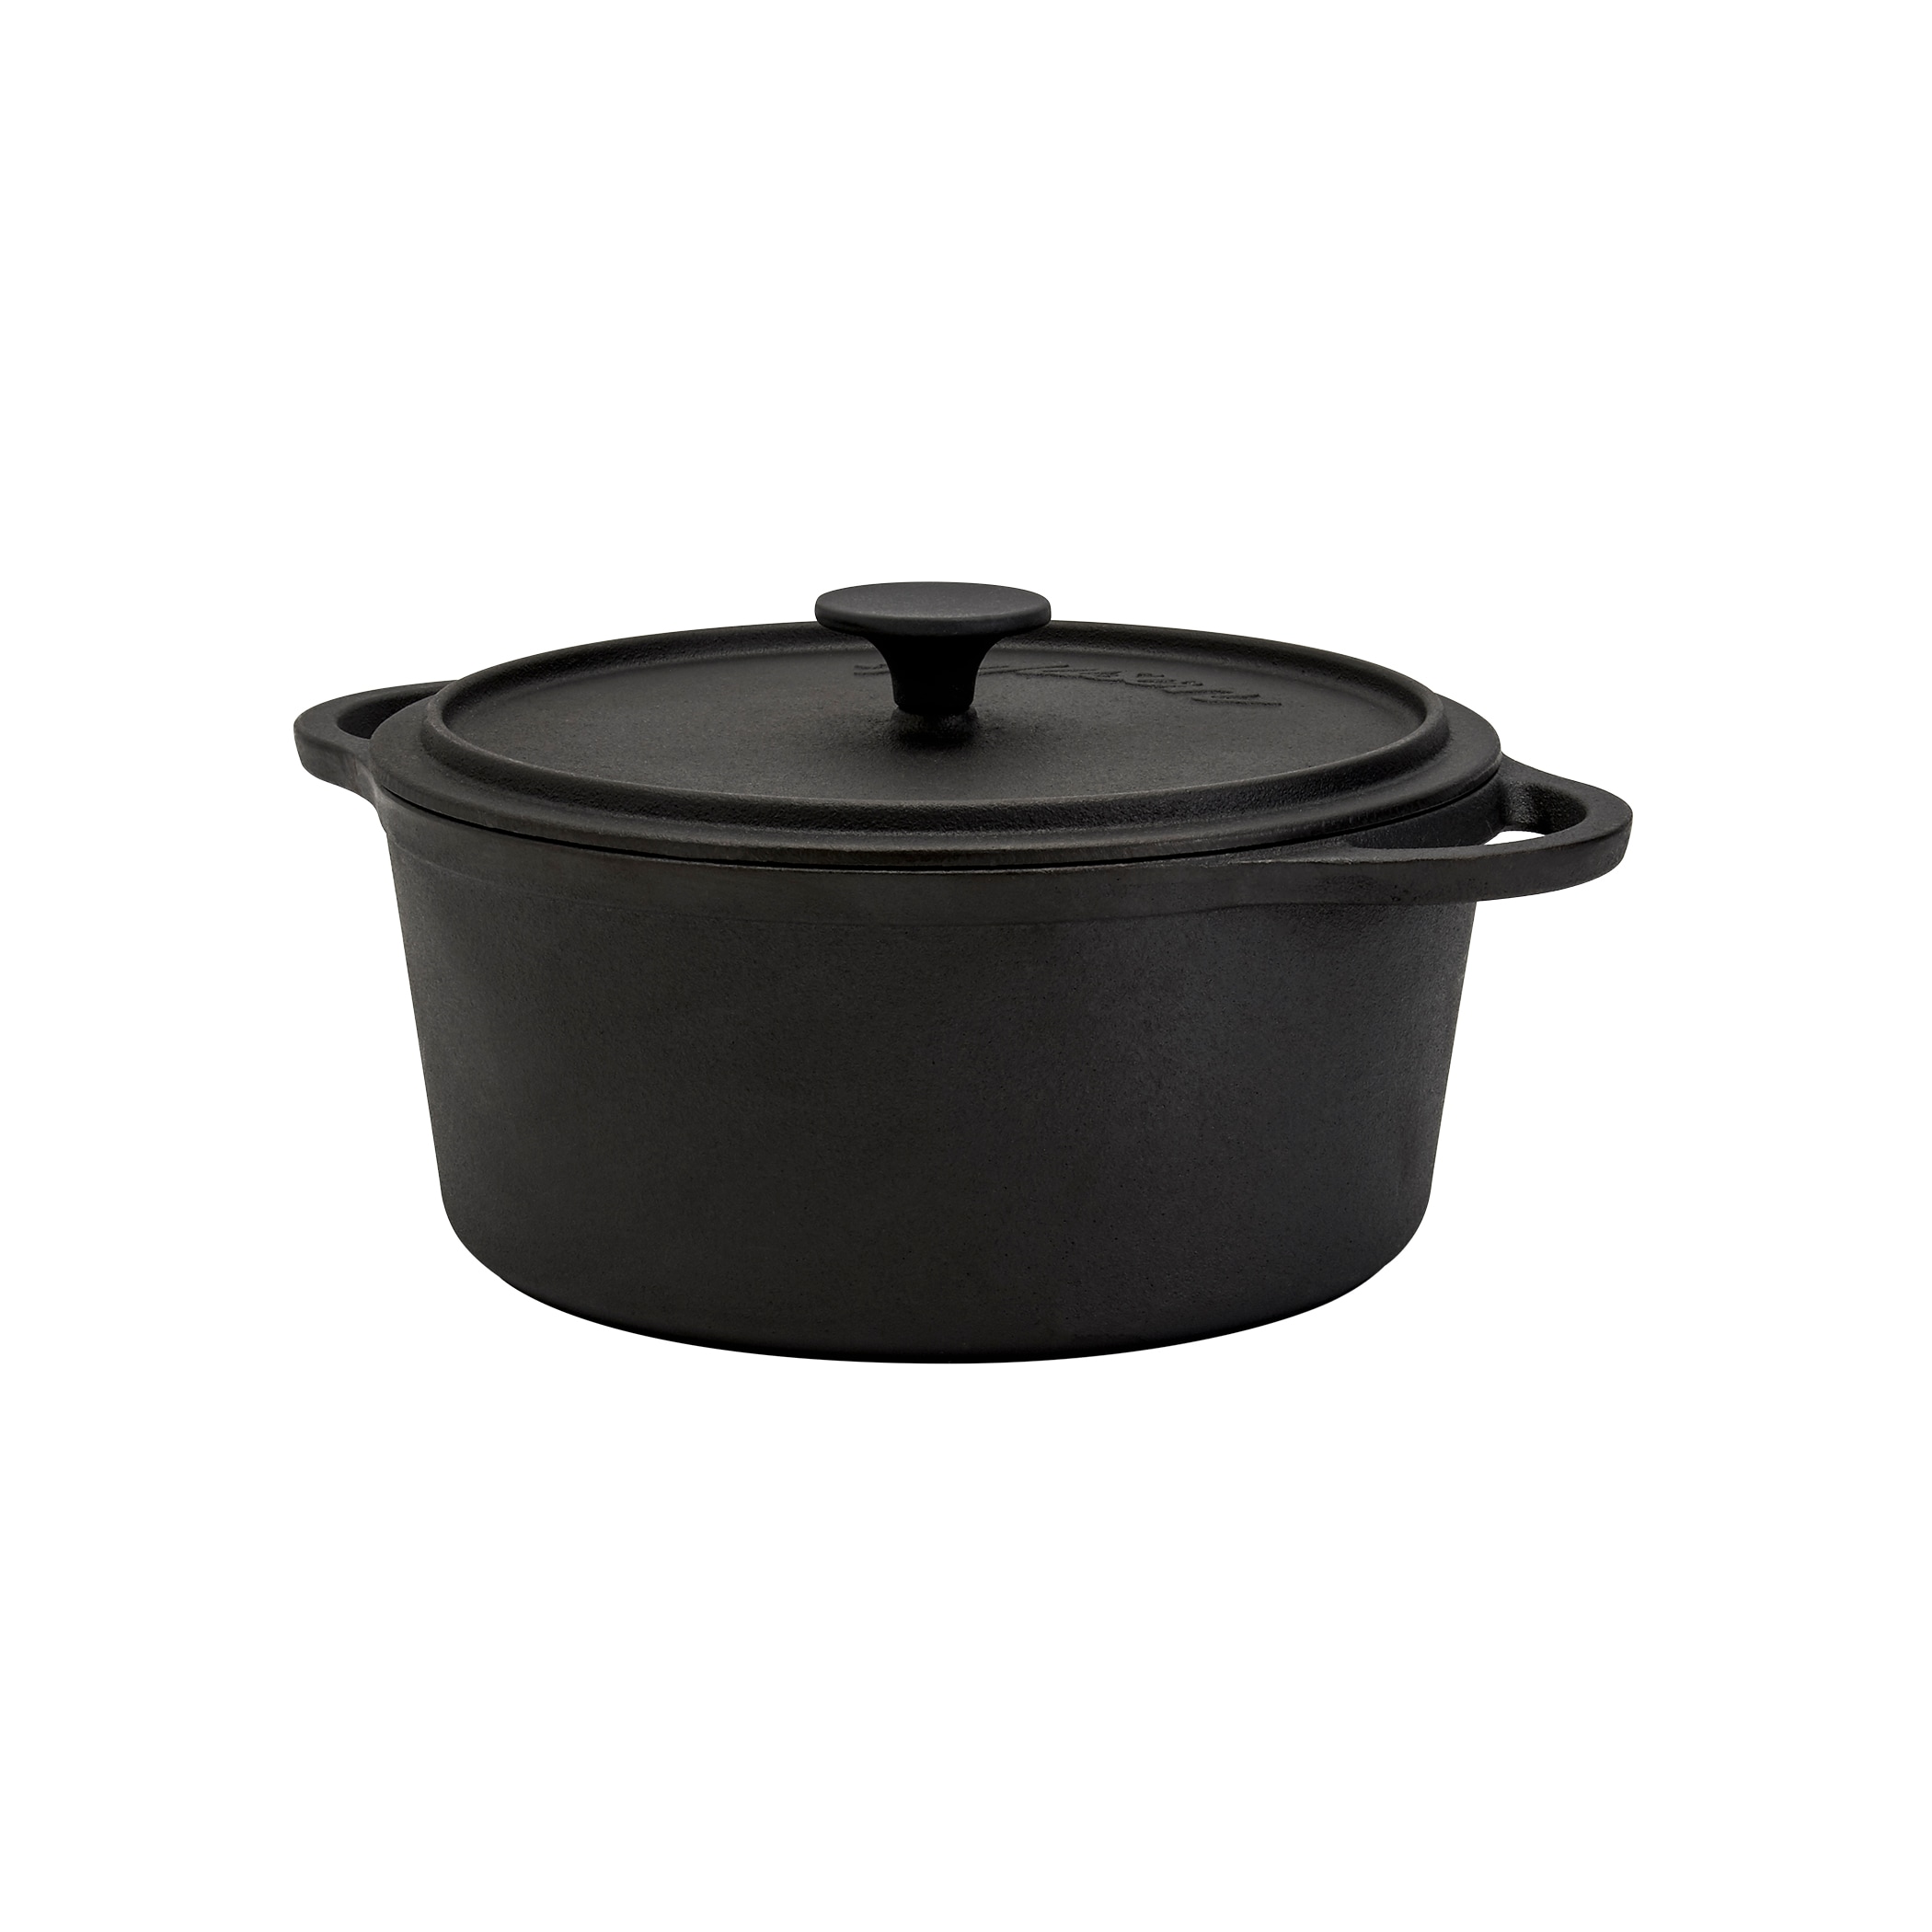 6 Quart Cast Iron Dutch Oven With Embossed Lid, Induction Safe